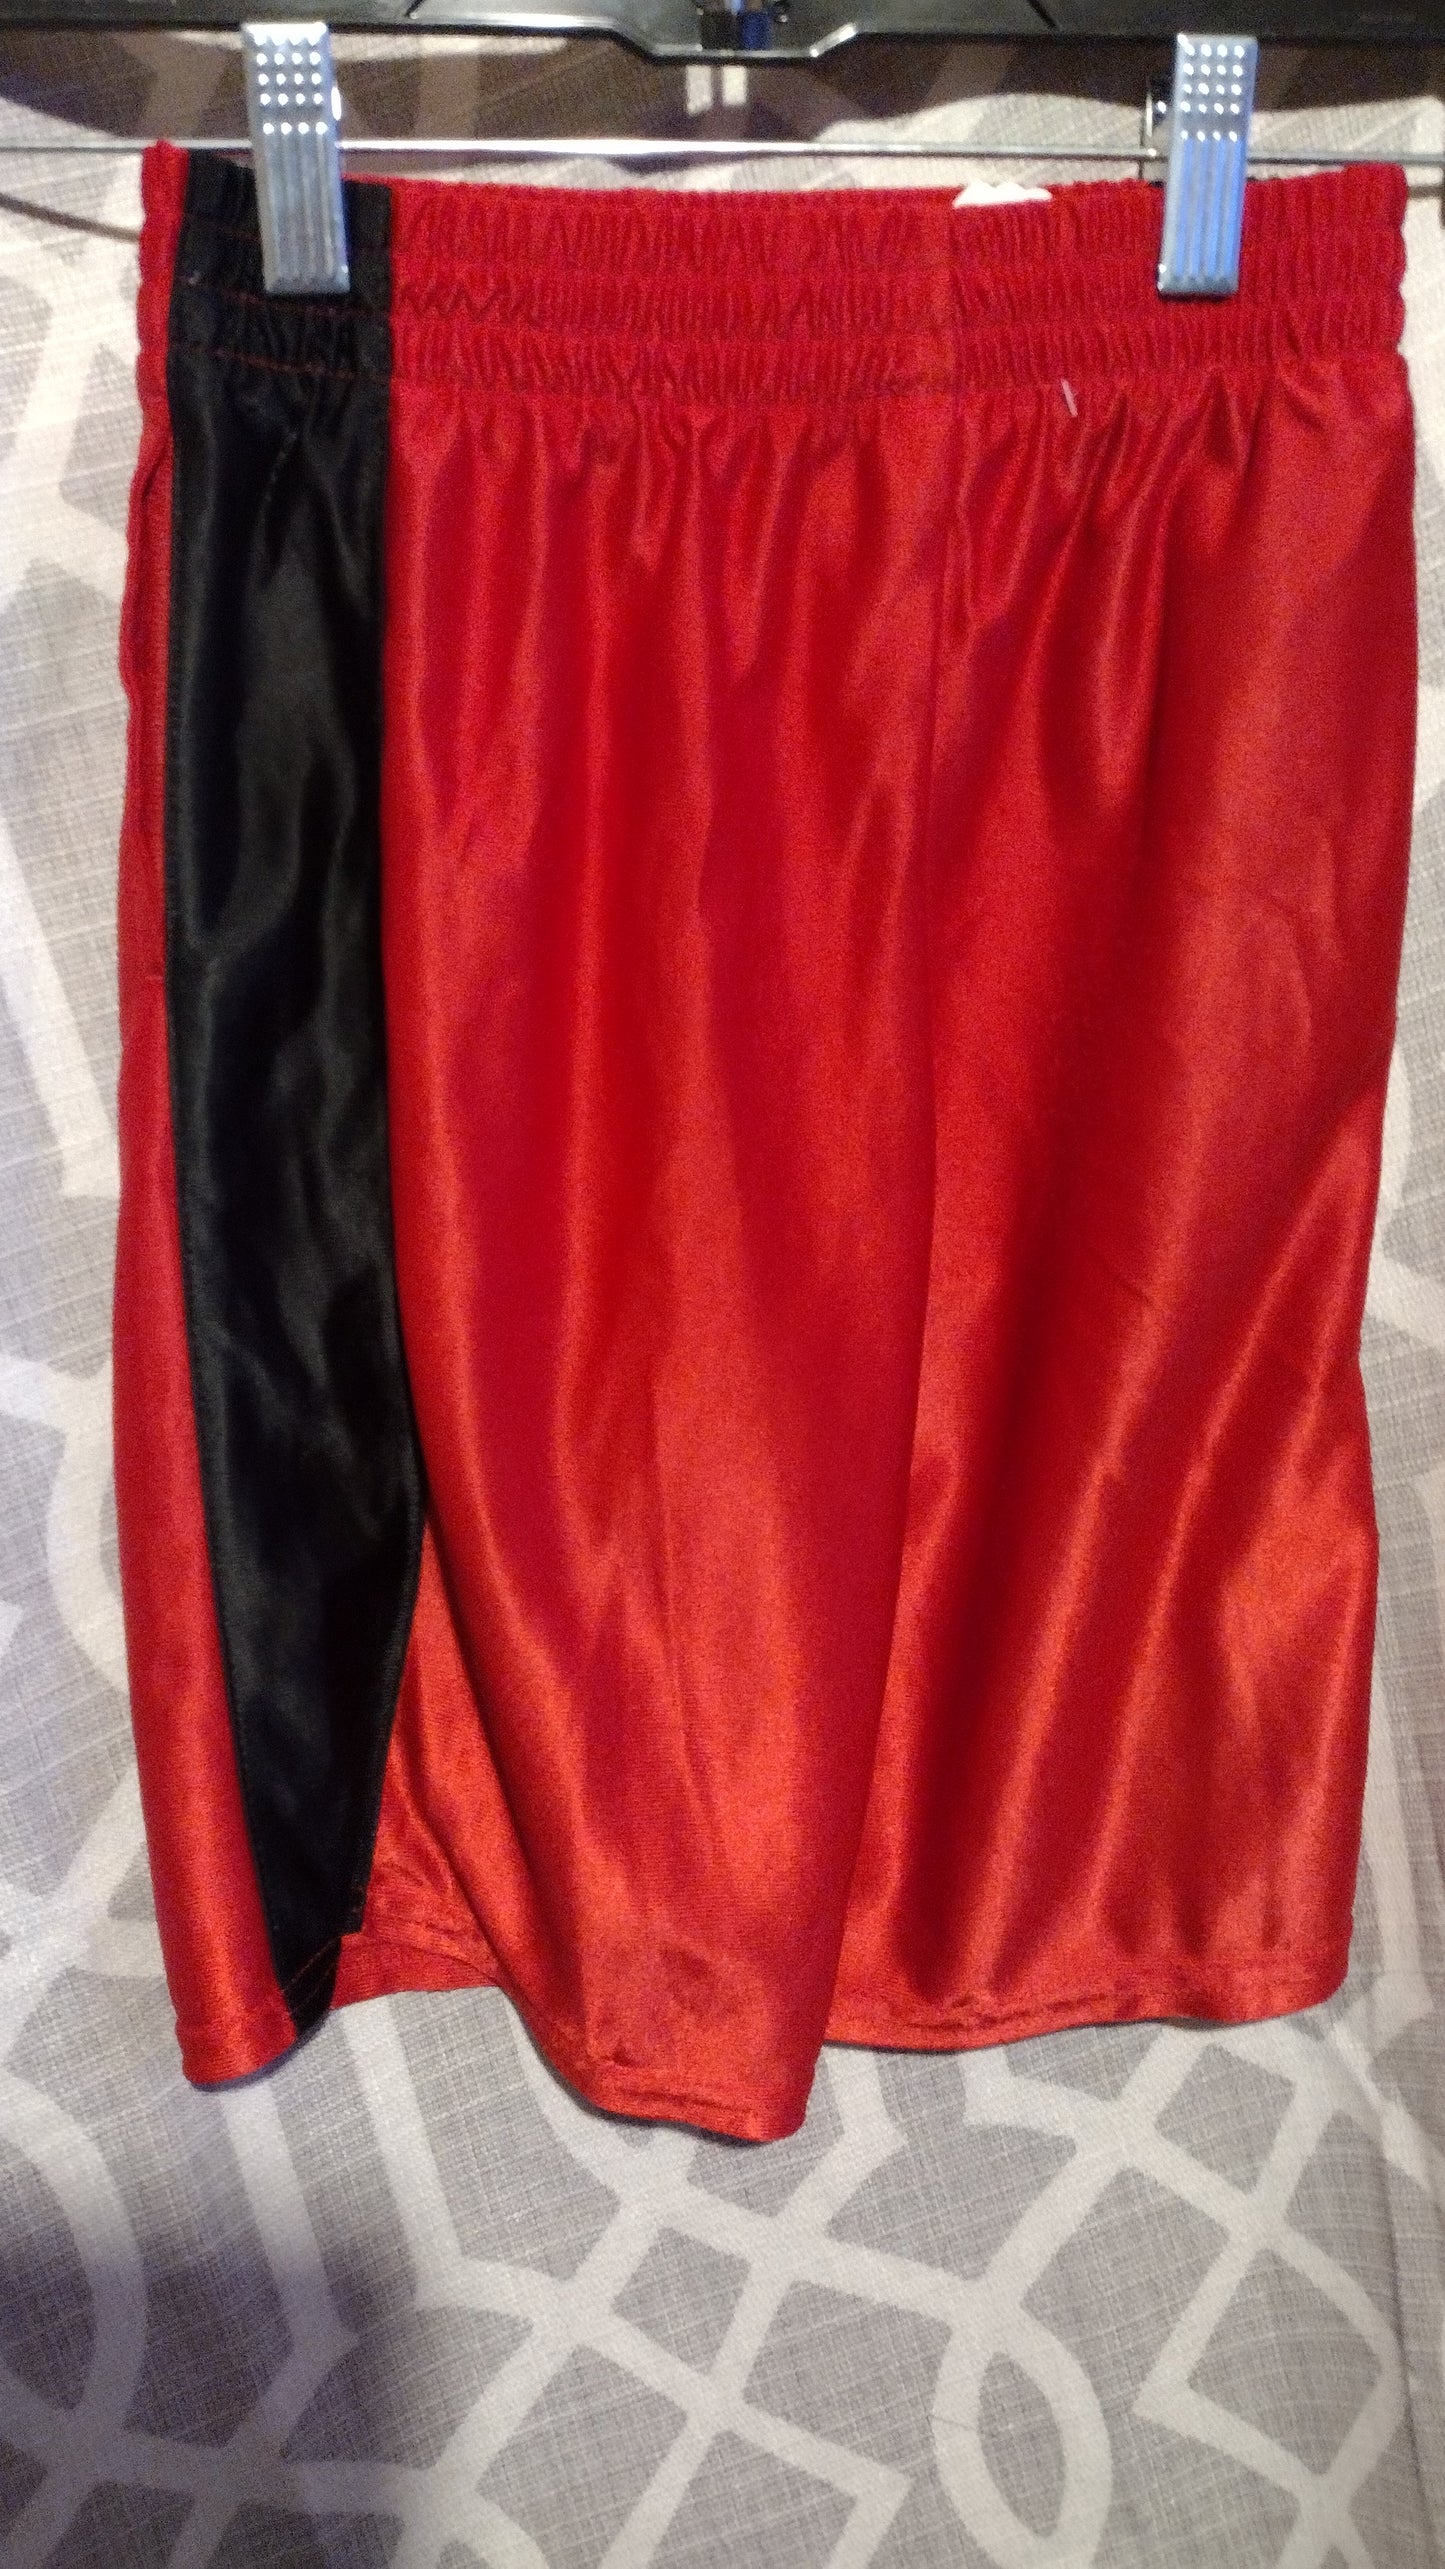 Boys red Athletic shorts size 8